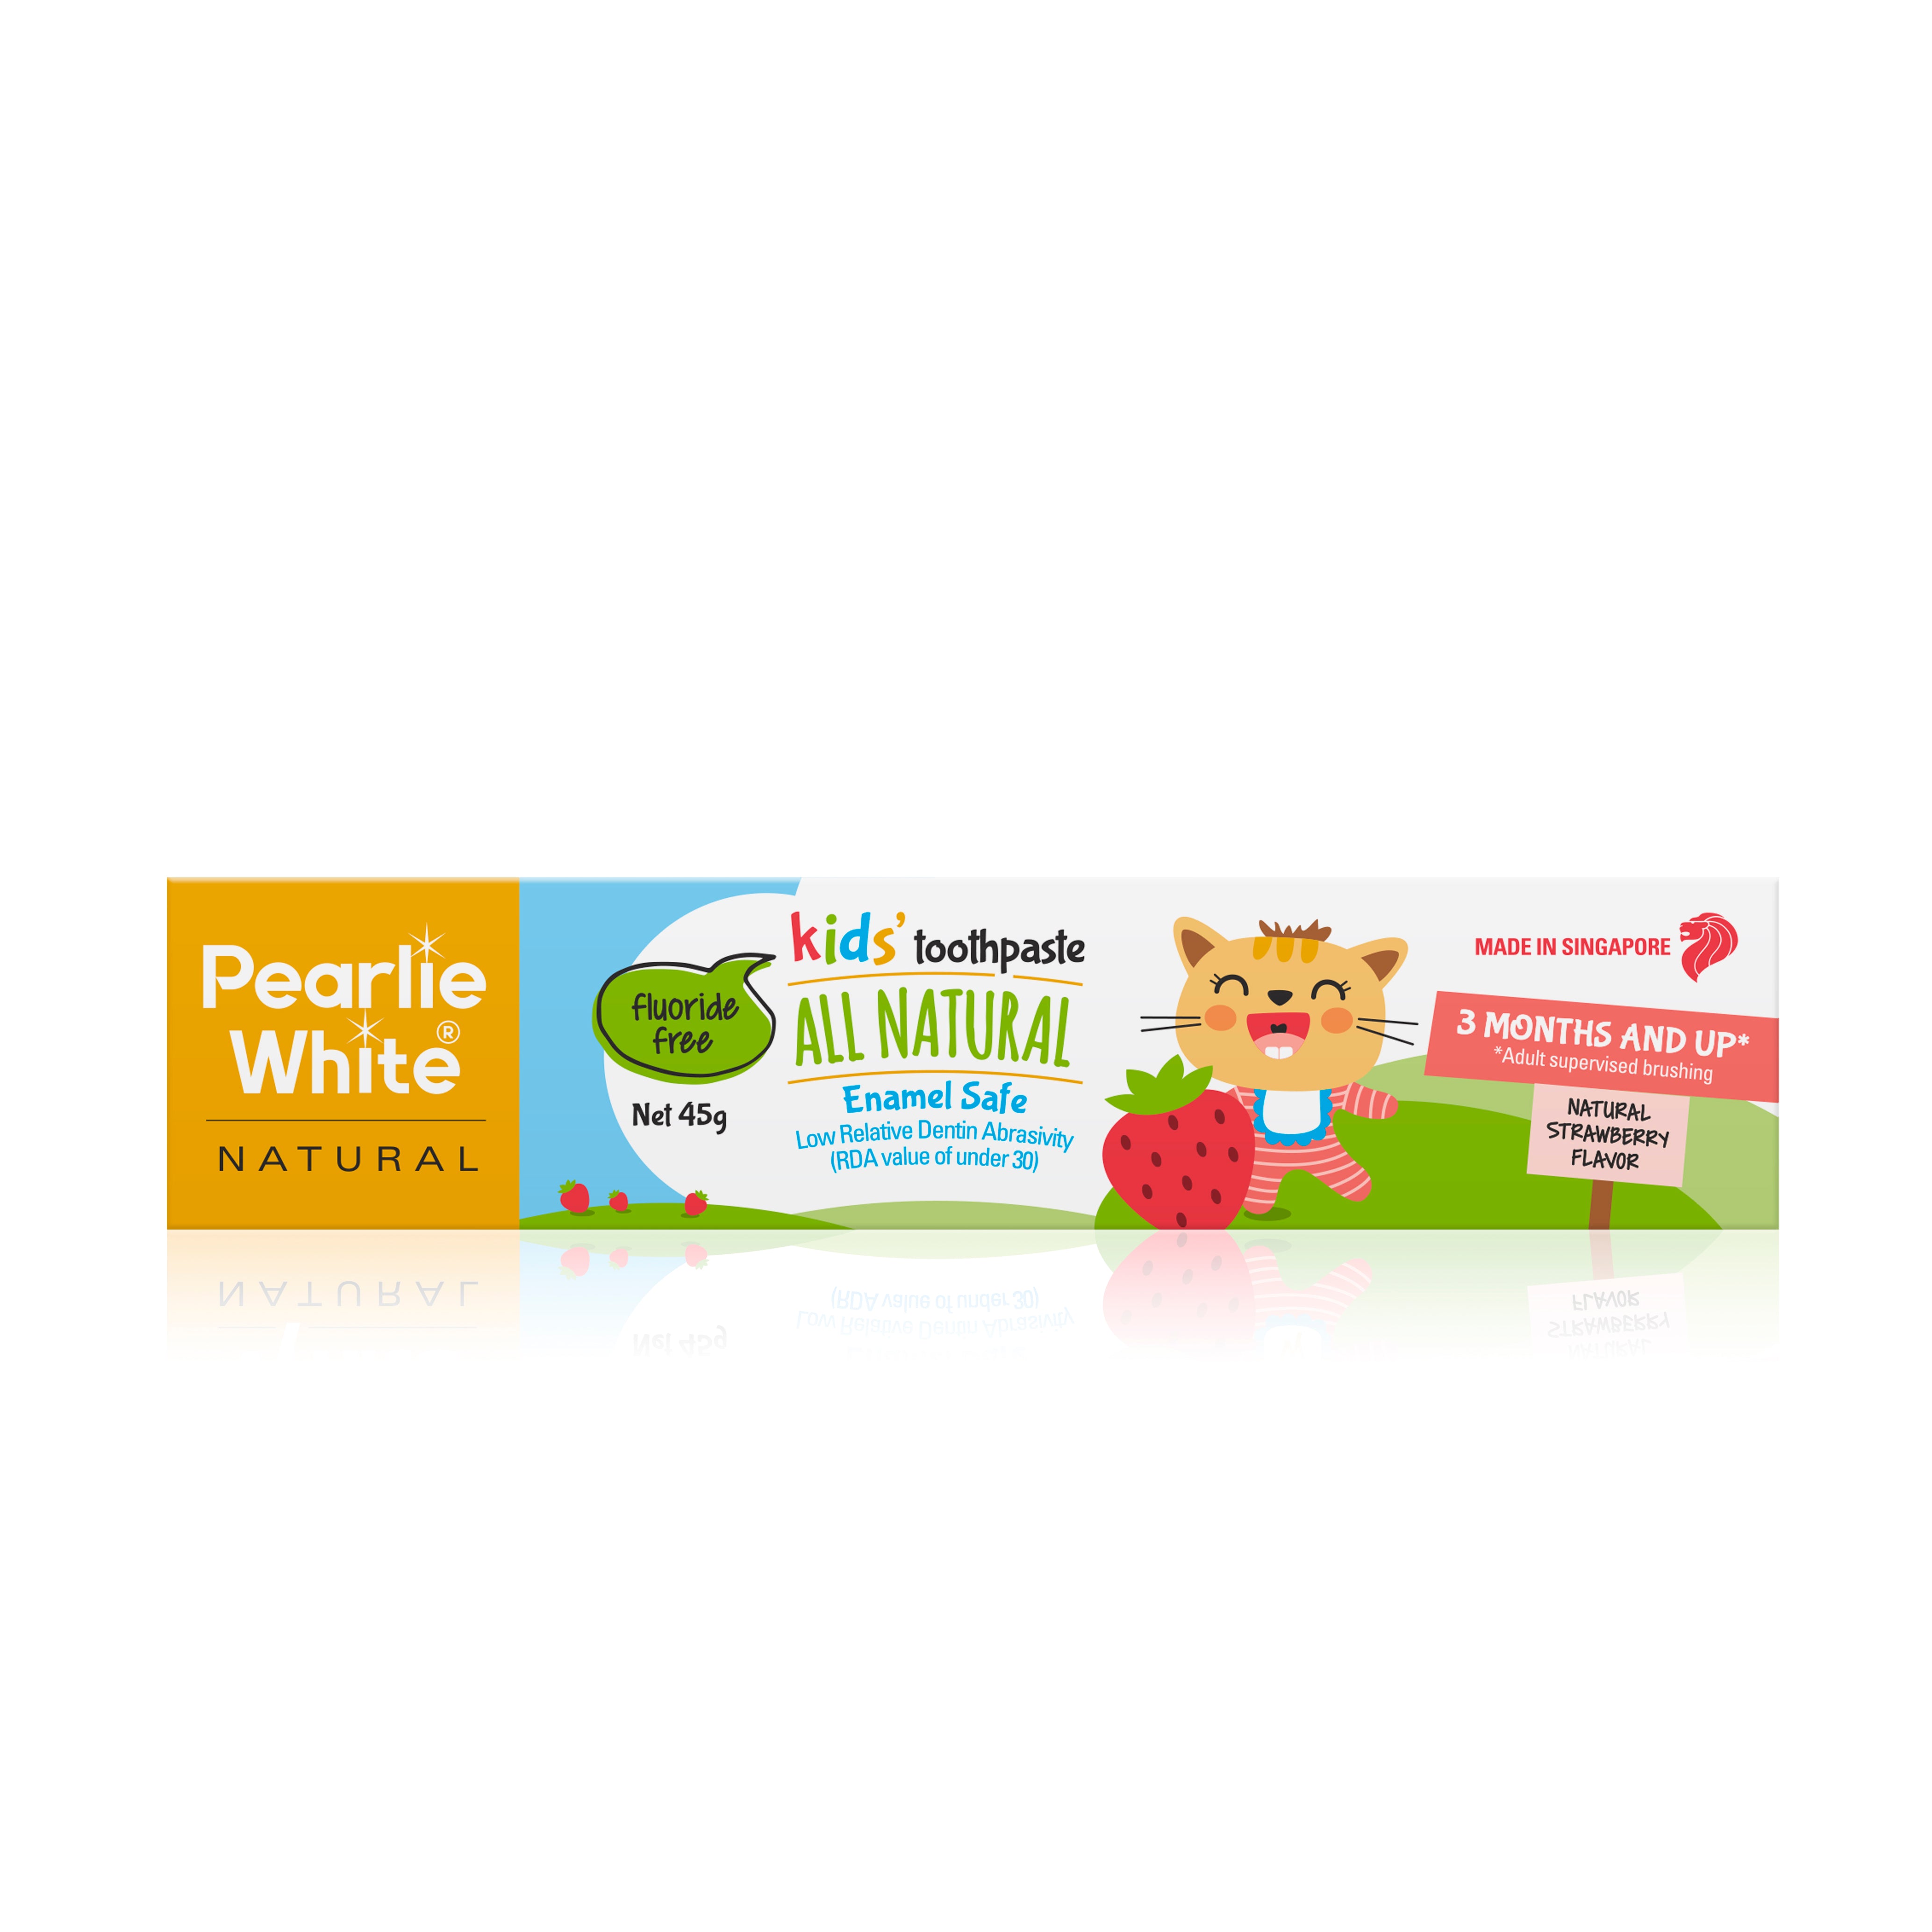 All Natural Enamel Safe Kids’ Toothpaste (Strawberry) 45g- Triple Pack